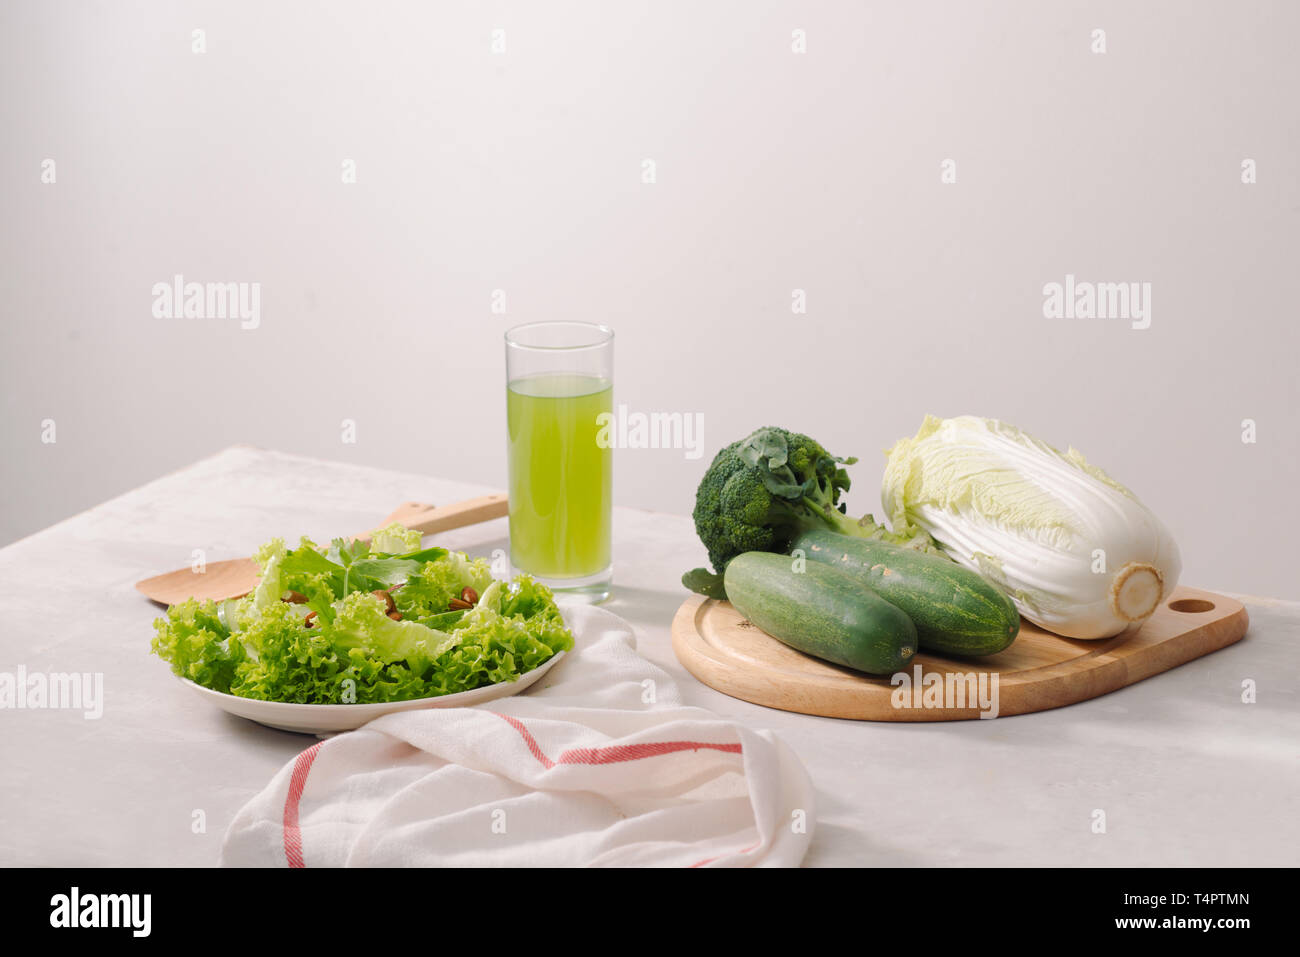 Various green organic salad ingredients on white background. Healthy lifestyle or detox diet food concept Stock Photo